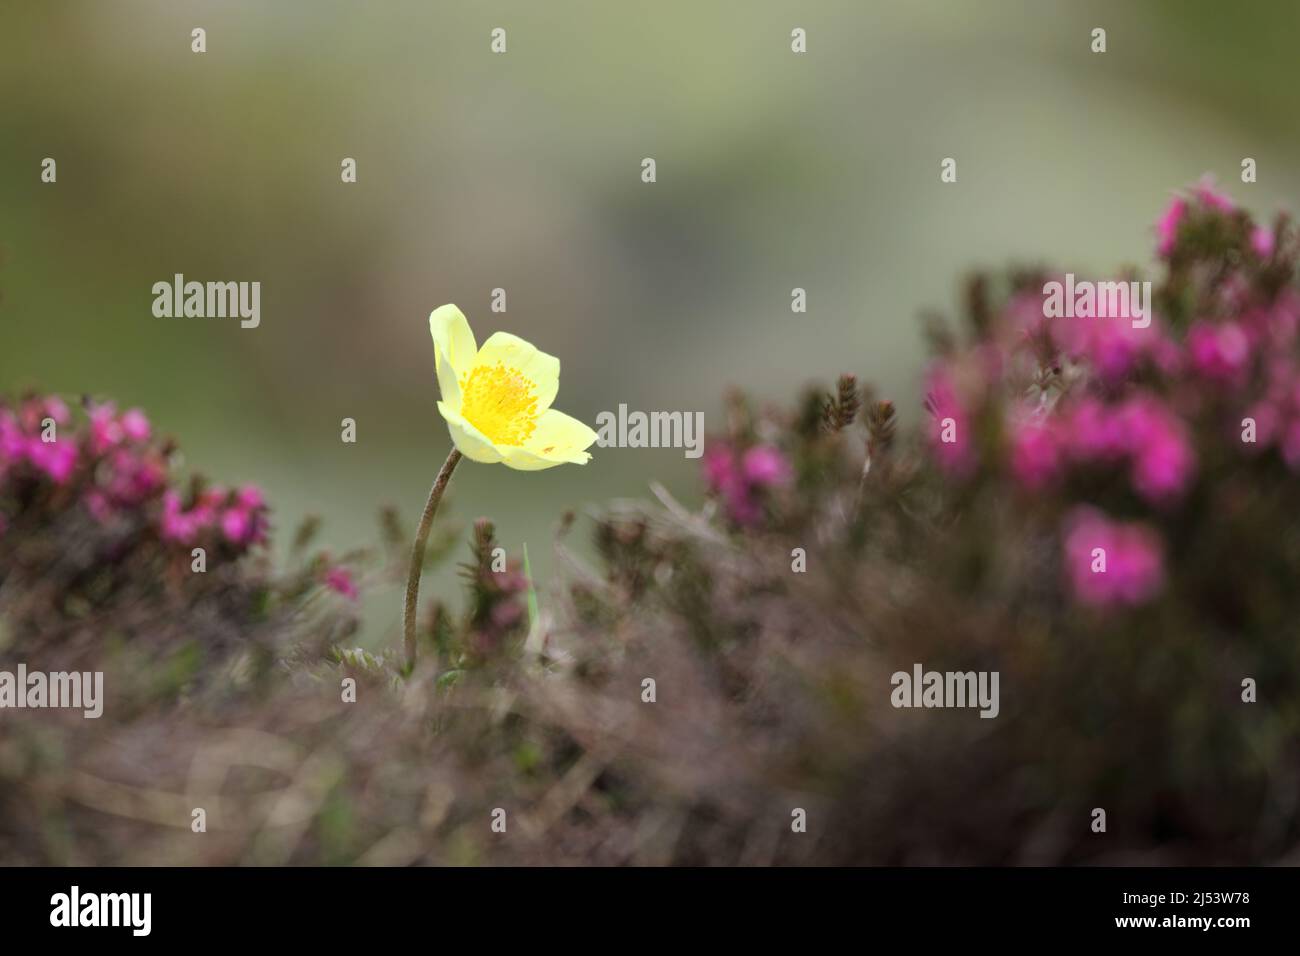 Yellow flowers mixed with pink foreground. Flowers: Pulsatilla alpina subsp. apiifolia commonly known as alpine pasqueflower or alpine anemone Stock Photo